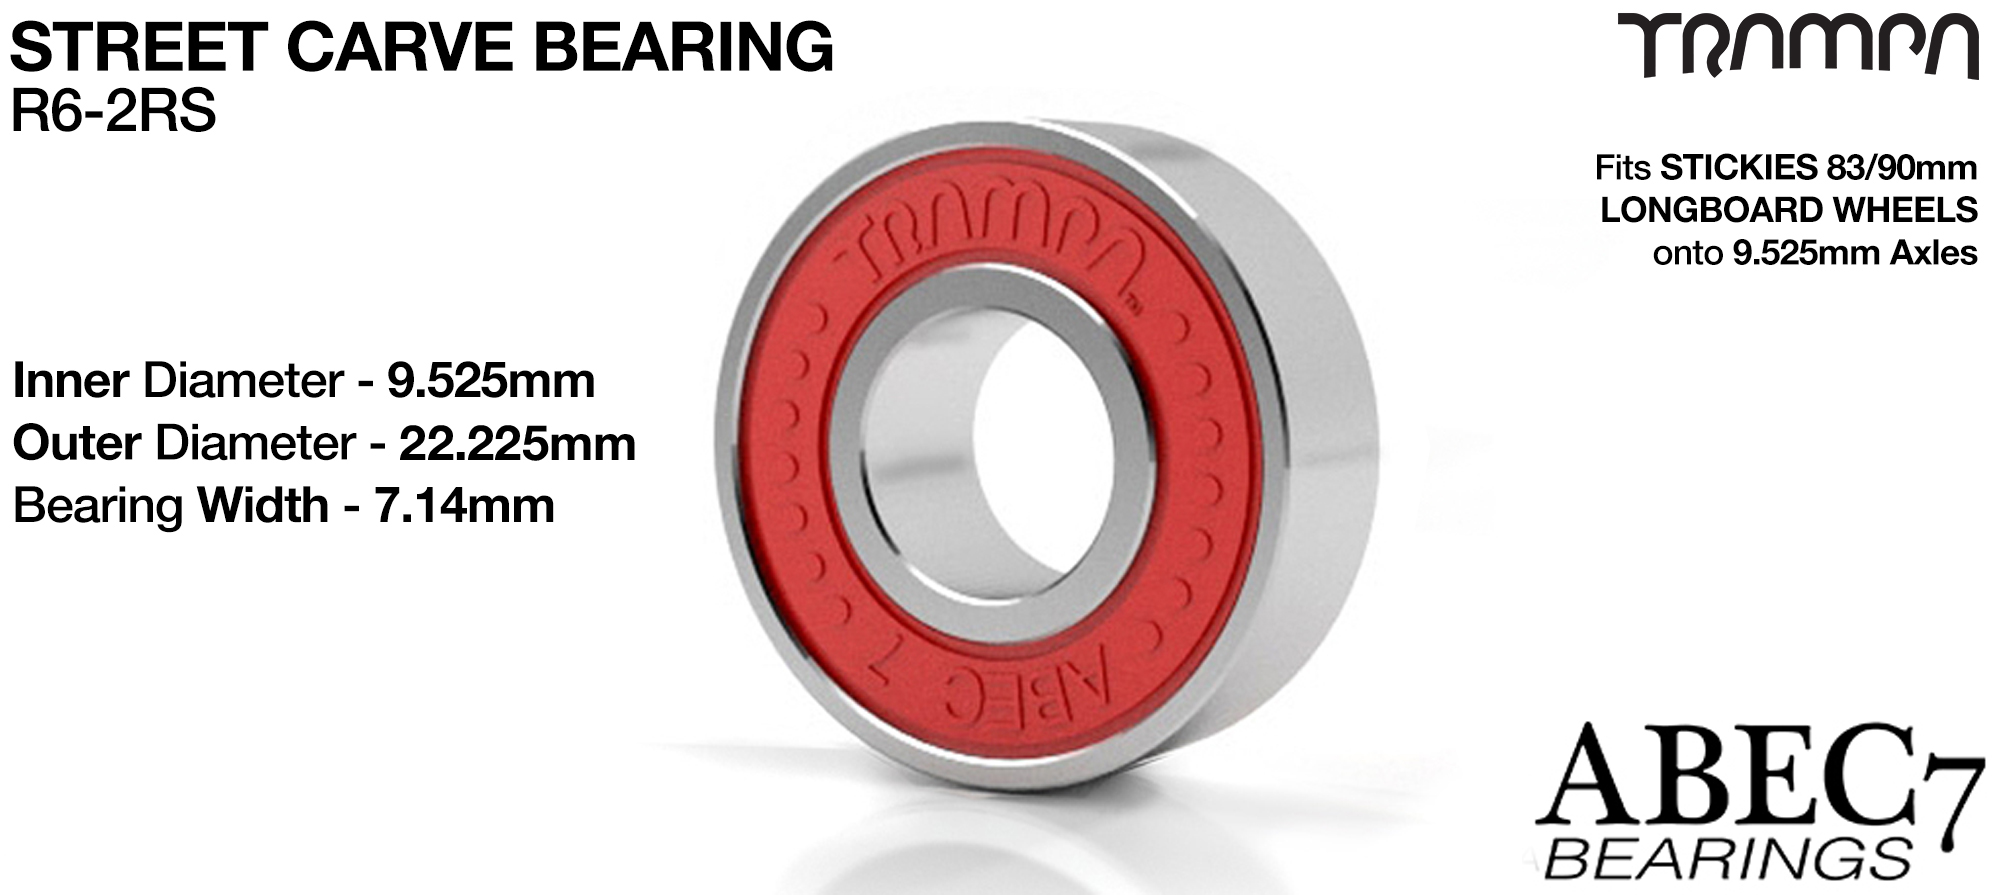 RED ABEC 7 R6-2RS 9.525mm Bearings (+£5)